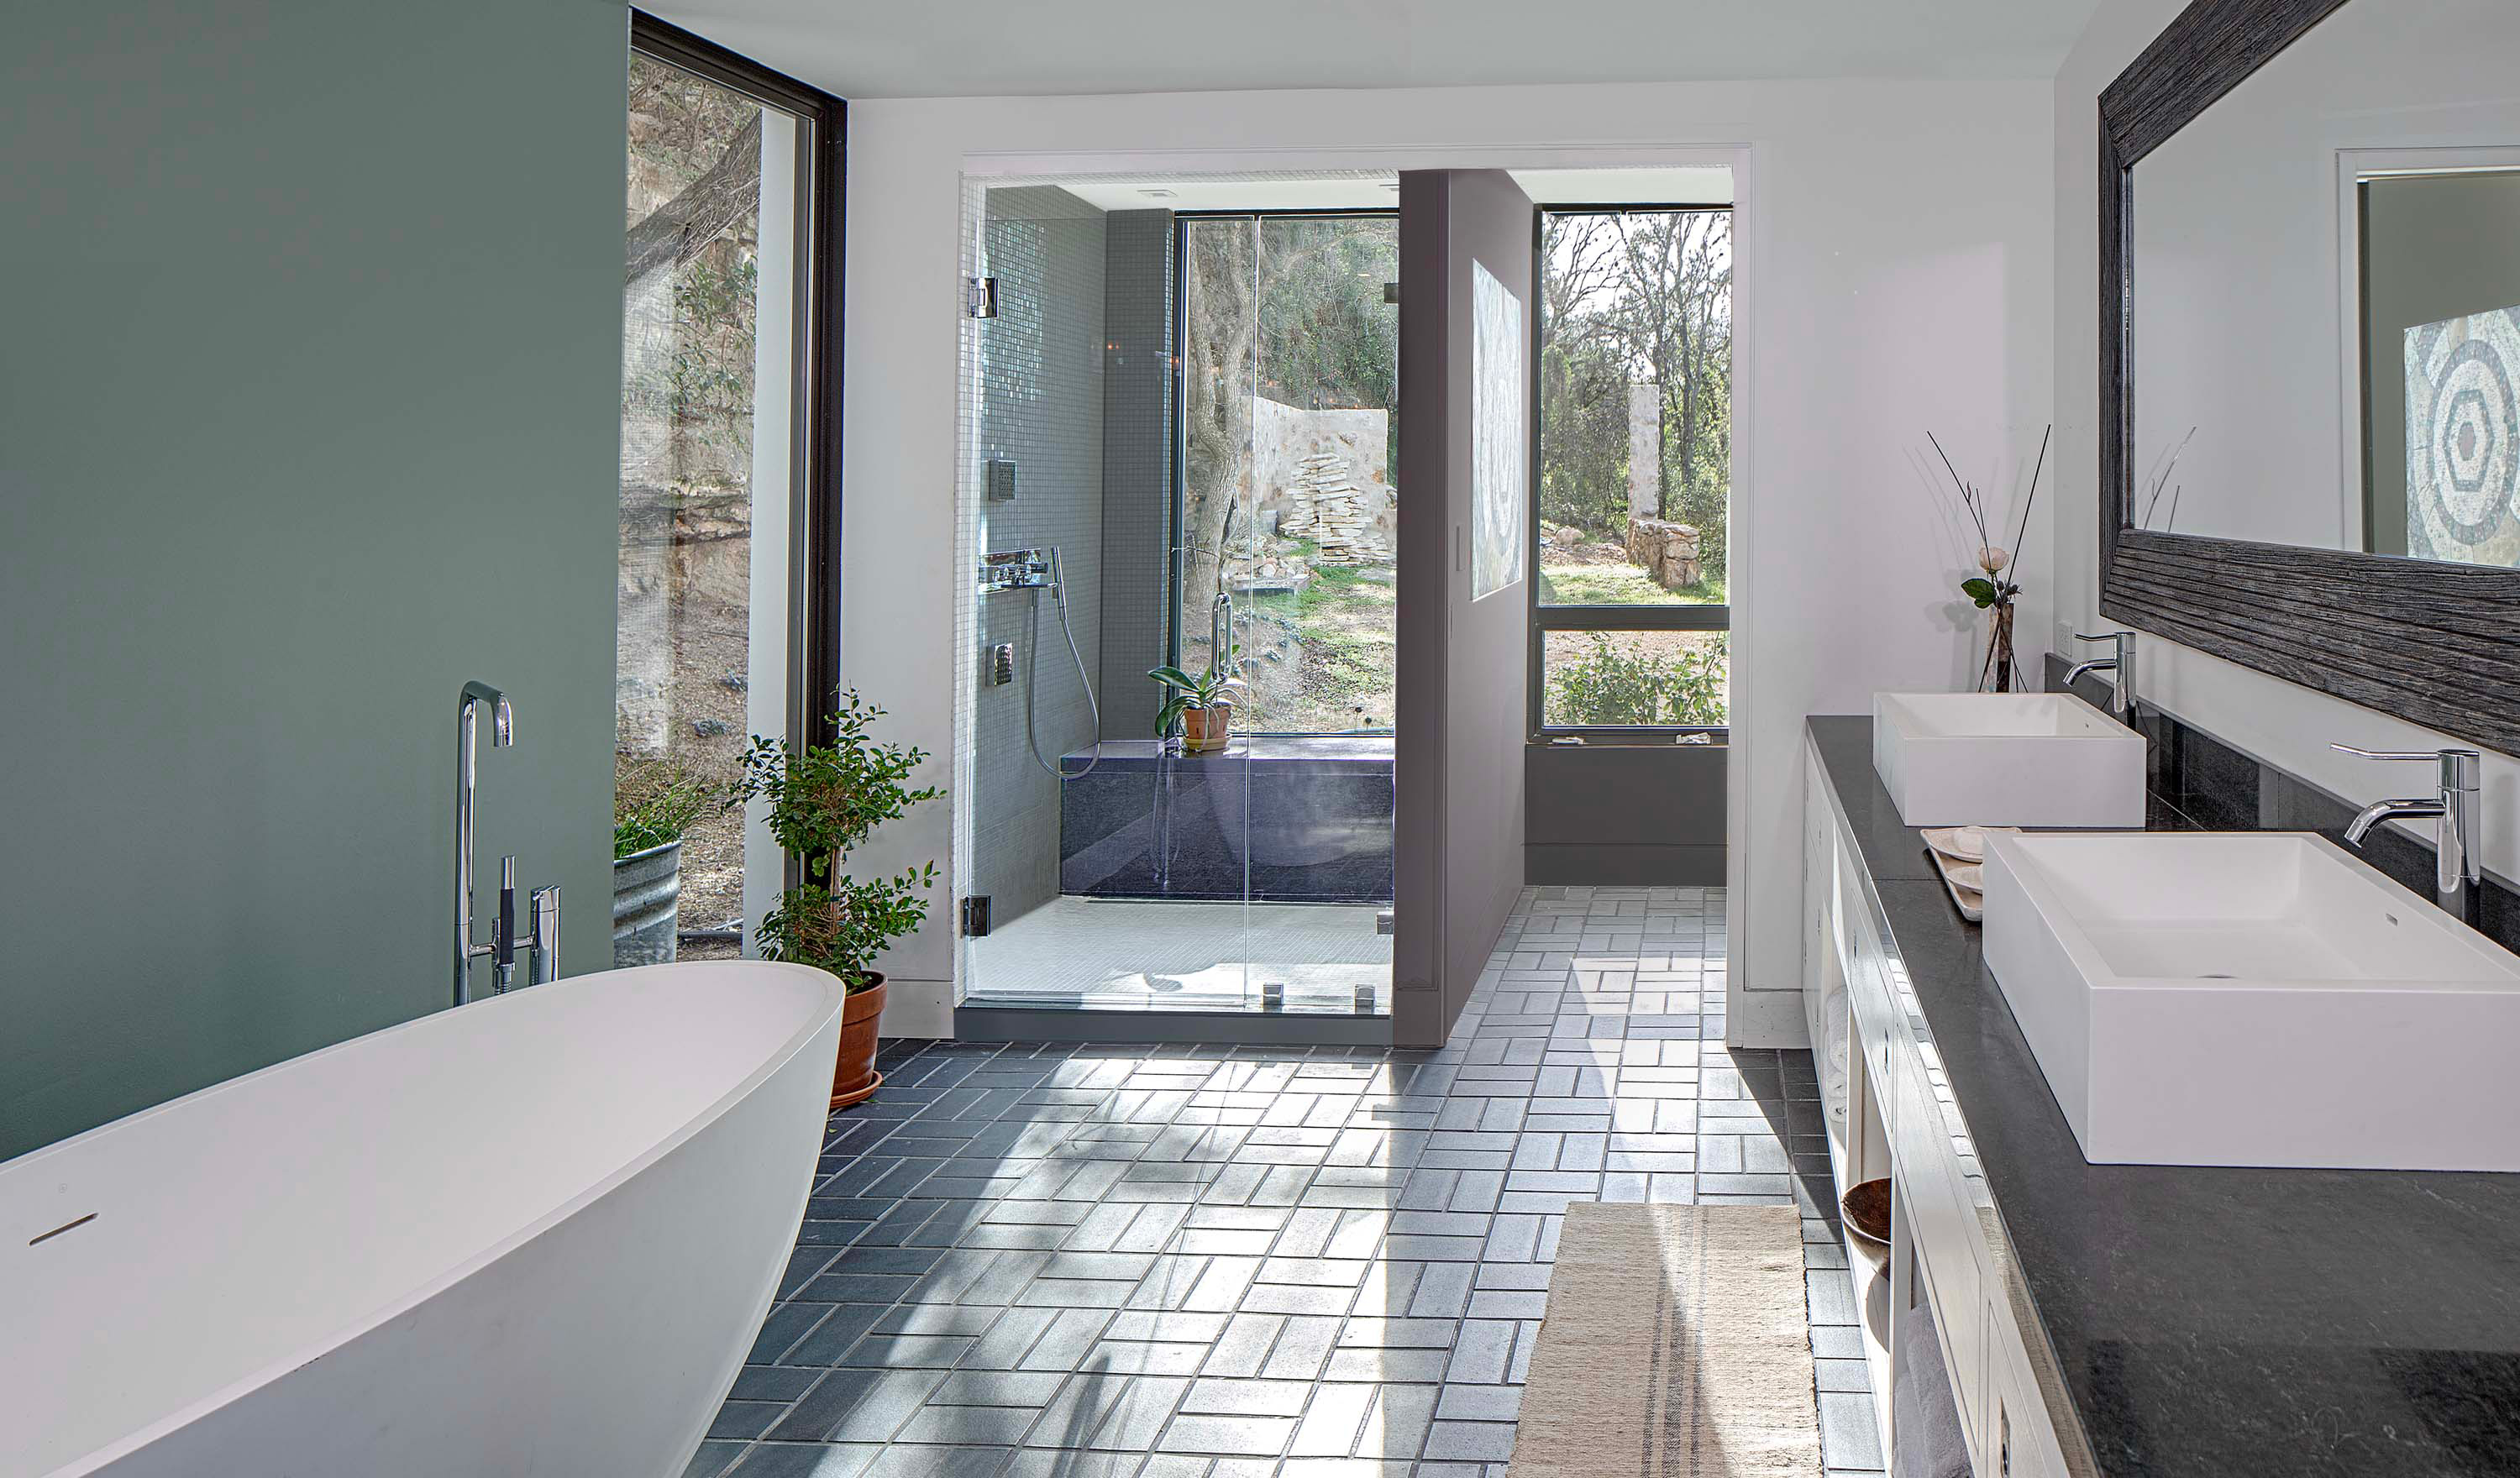 Interior photo of the Cliffside Residence by Specht Novak Architects. Shot by Andrea Calo, featuring a main bathroom, with bathtub, large shower, mosaic floors, and double vanity brightly illuminated by strategically placed glass walls.